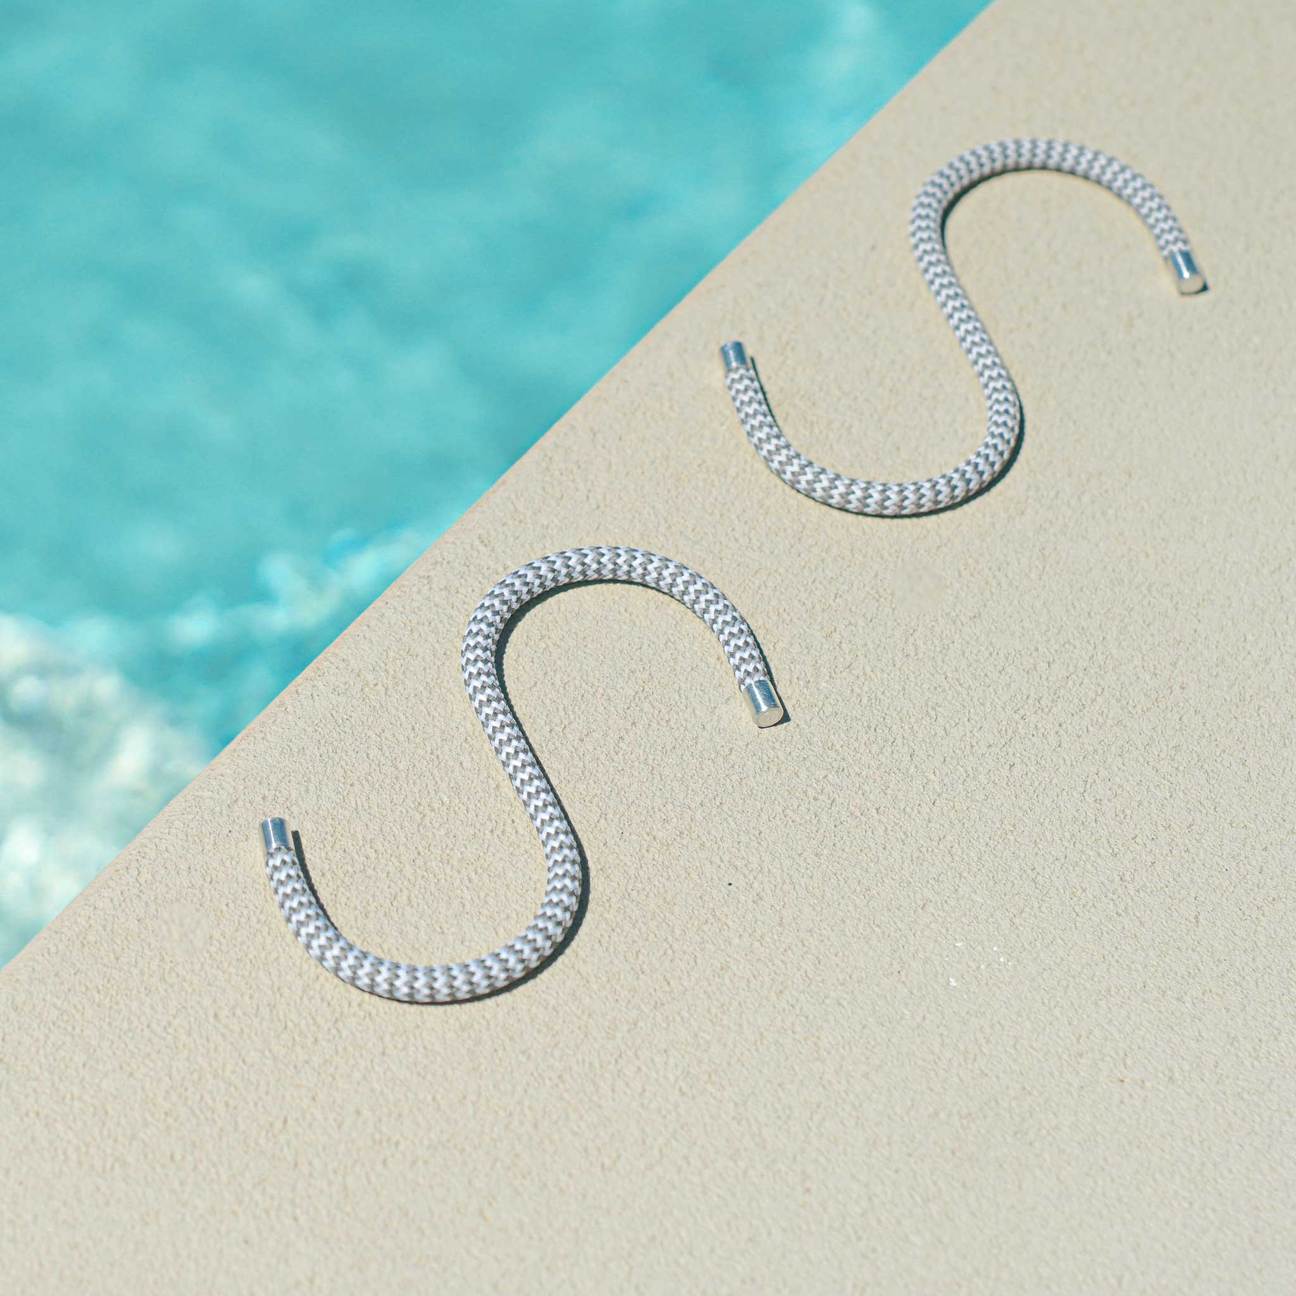 S hooks made of rope for clothes | Peppermint products